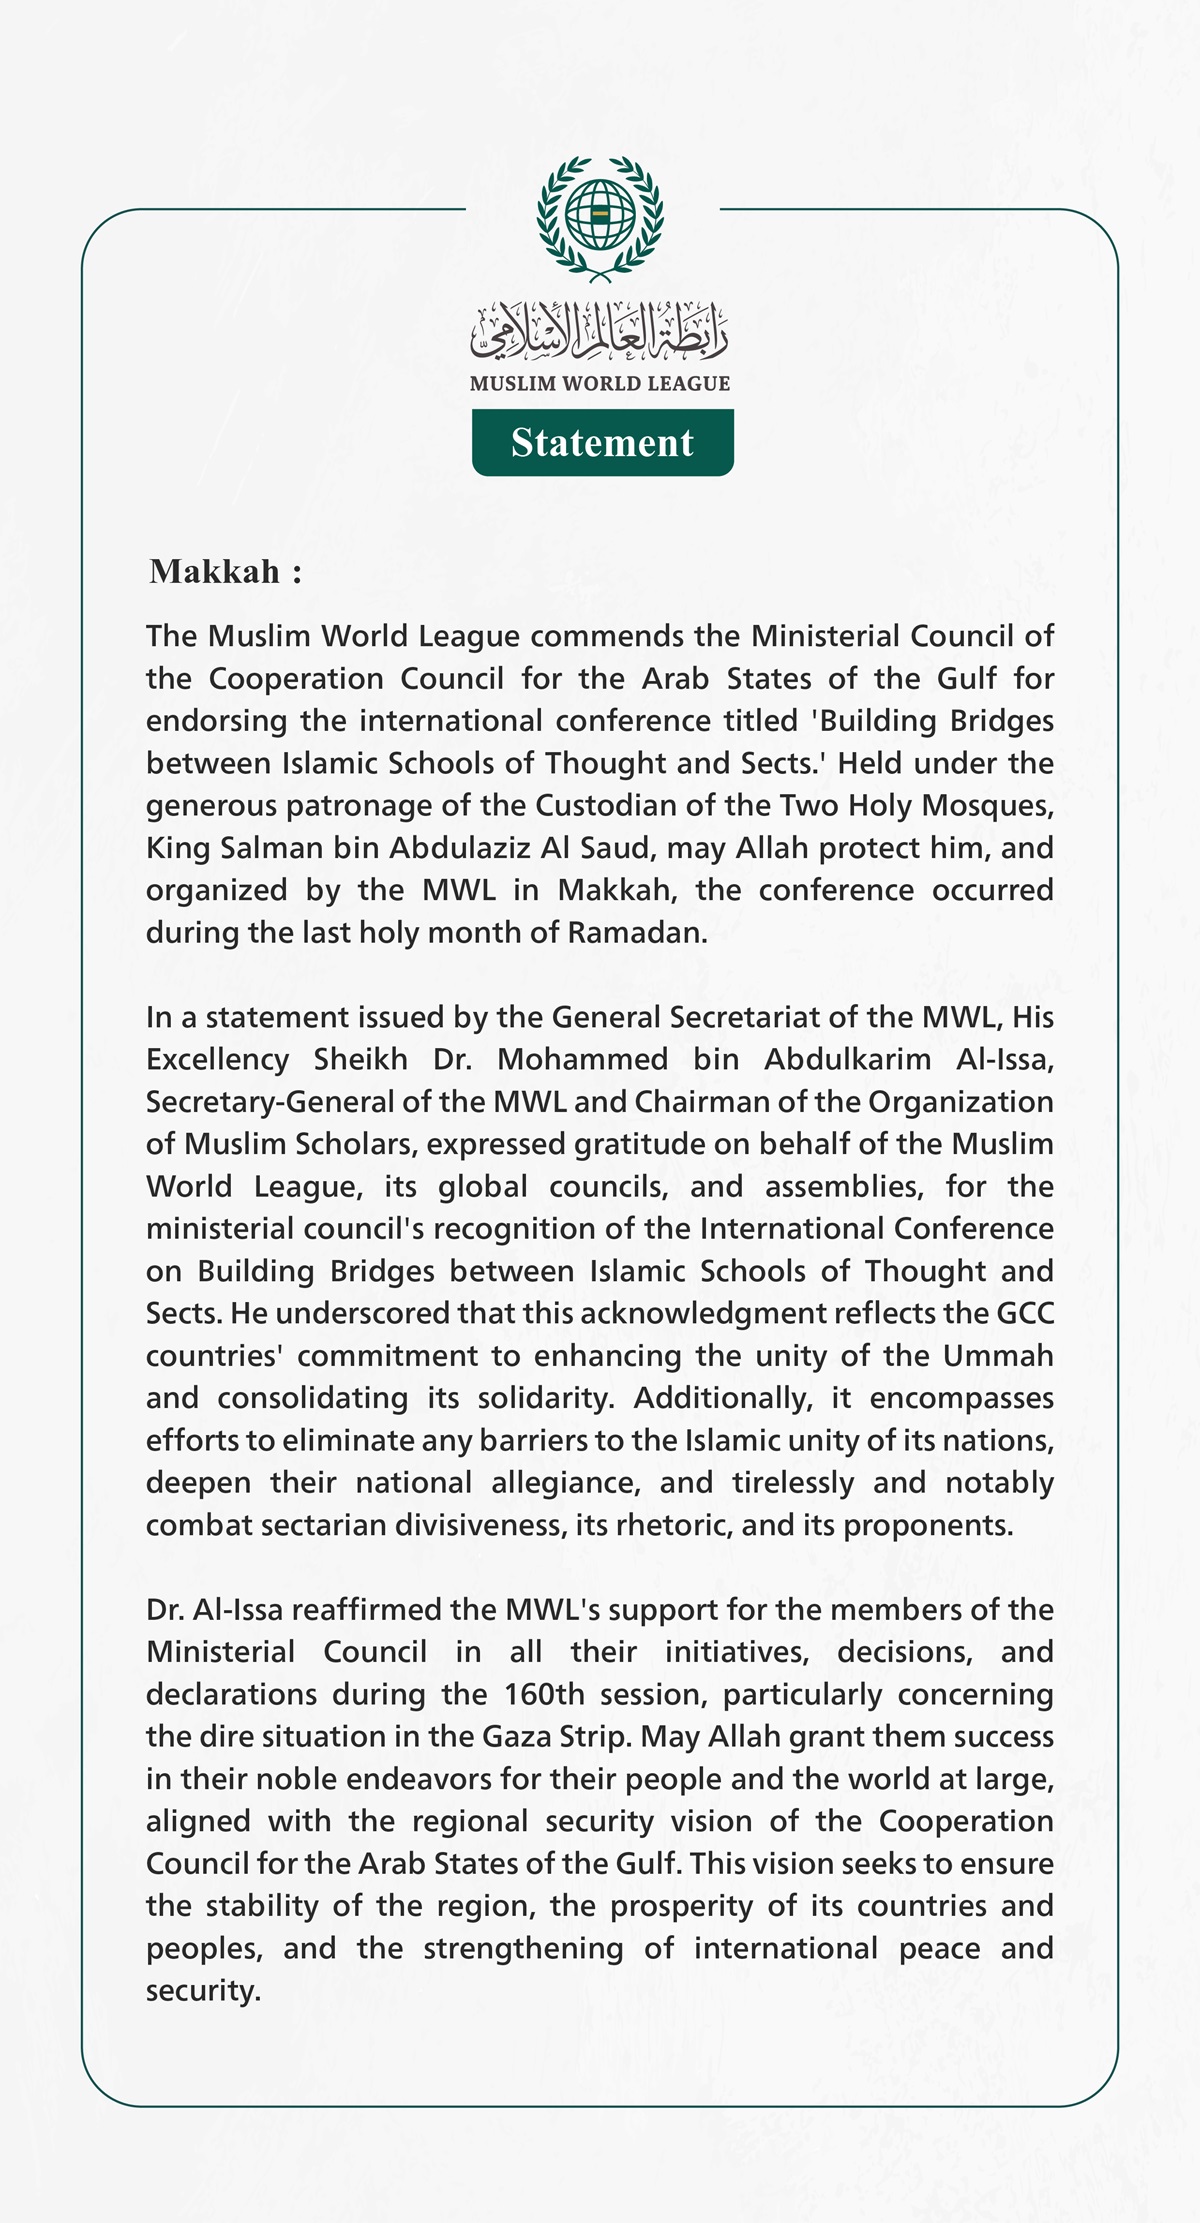 The Muslim World League appreciates the GCC Ministerial Council's welcoming of the contents of the conference on Building Bridges between Islamic Schools of Thought and Sects.